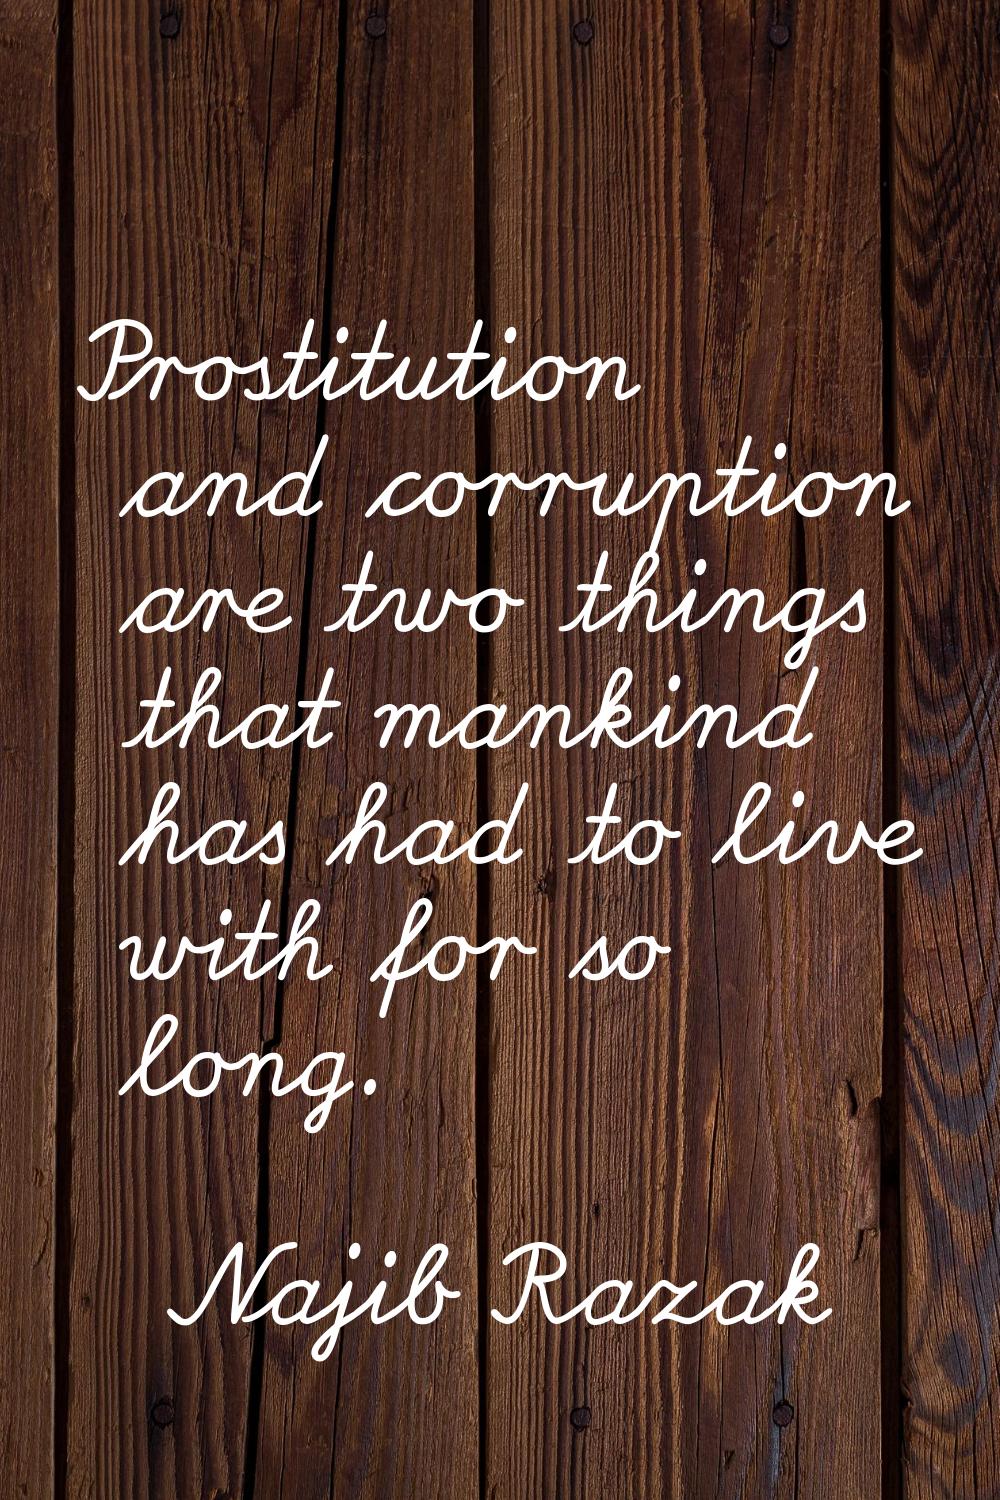 Prostitution and corruption are two things that mankind has had to live with for so long.